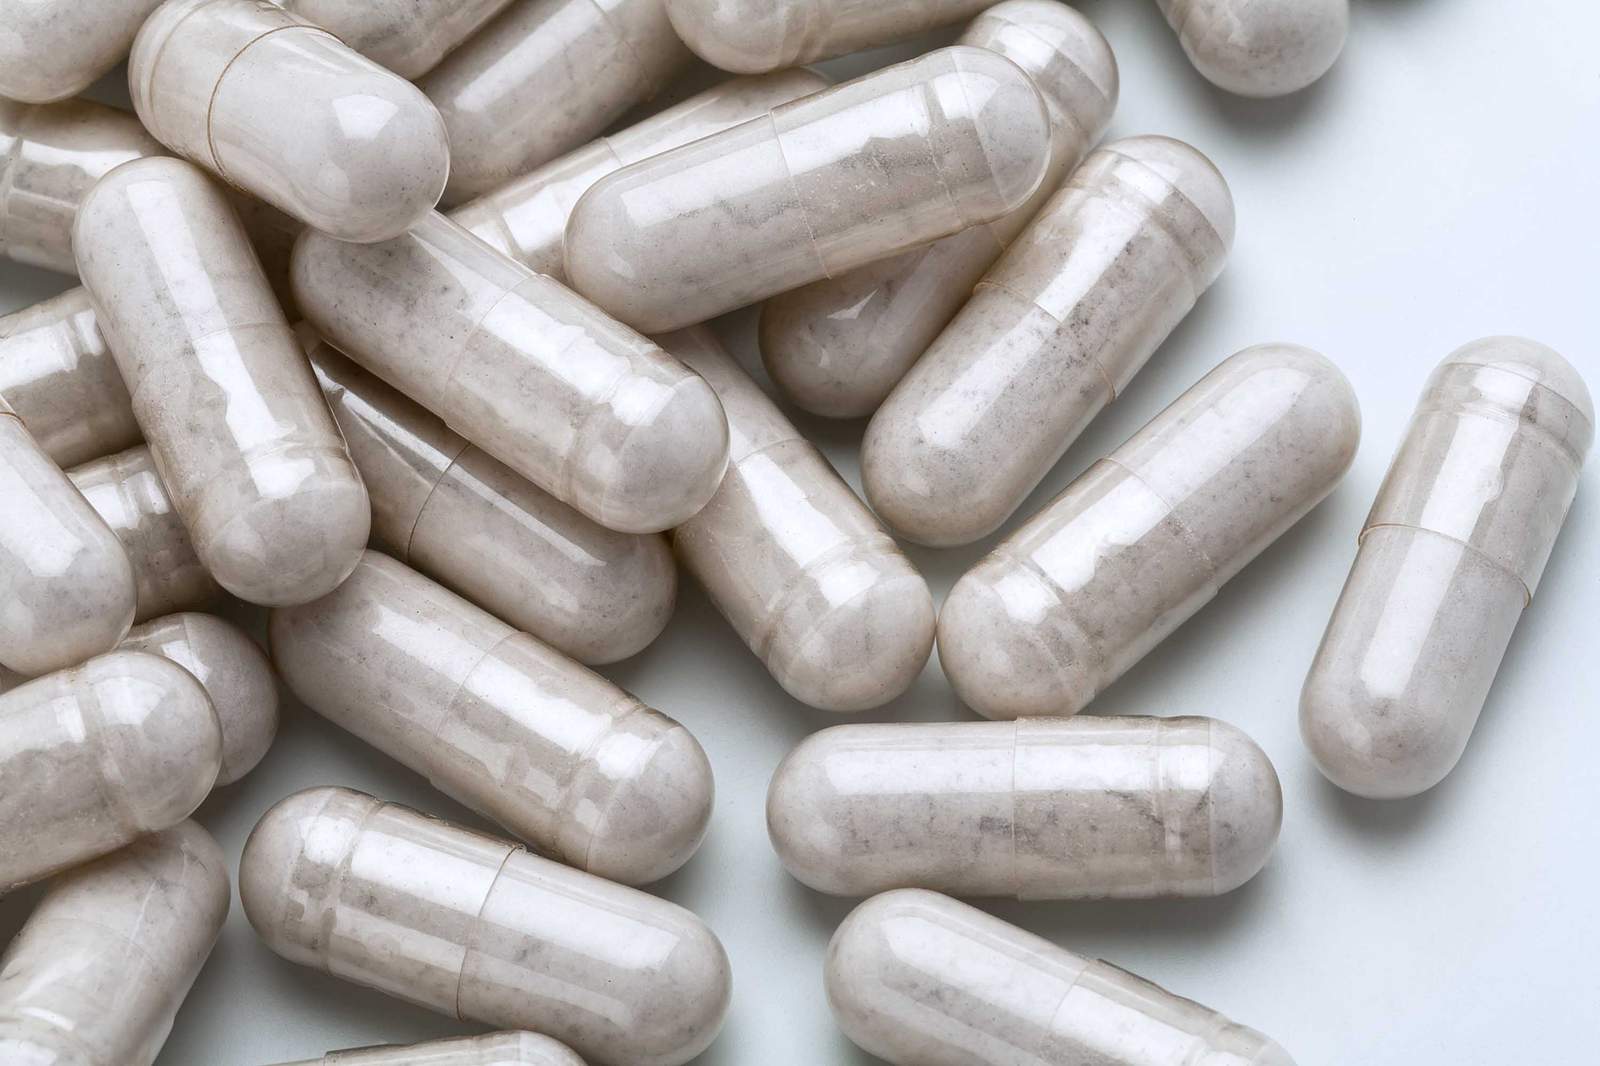 Can probiotics help with depression? New research suggests a link